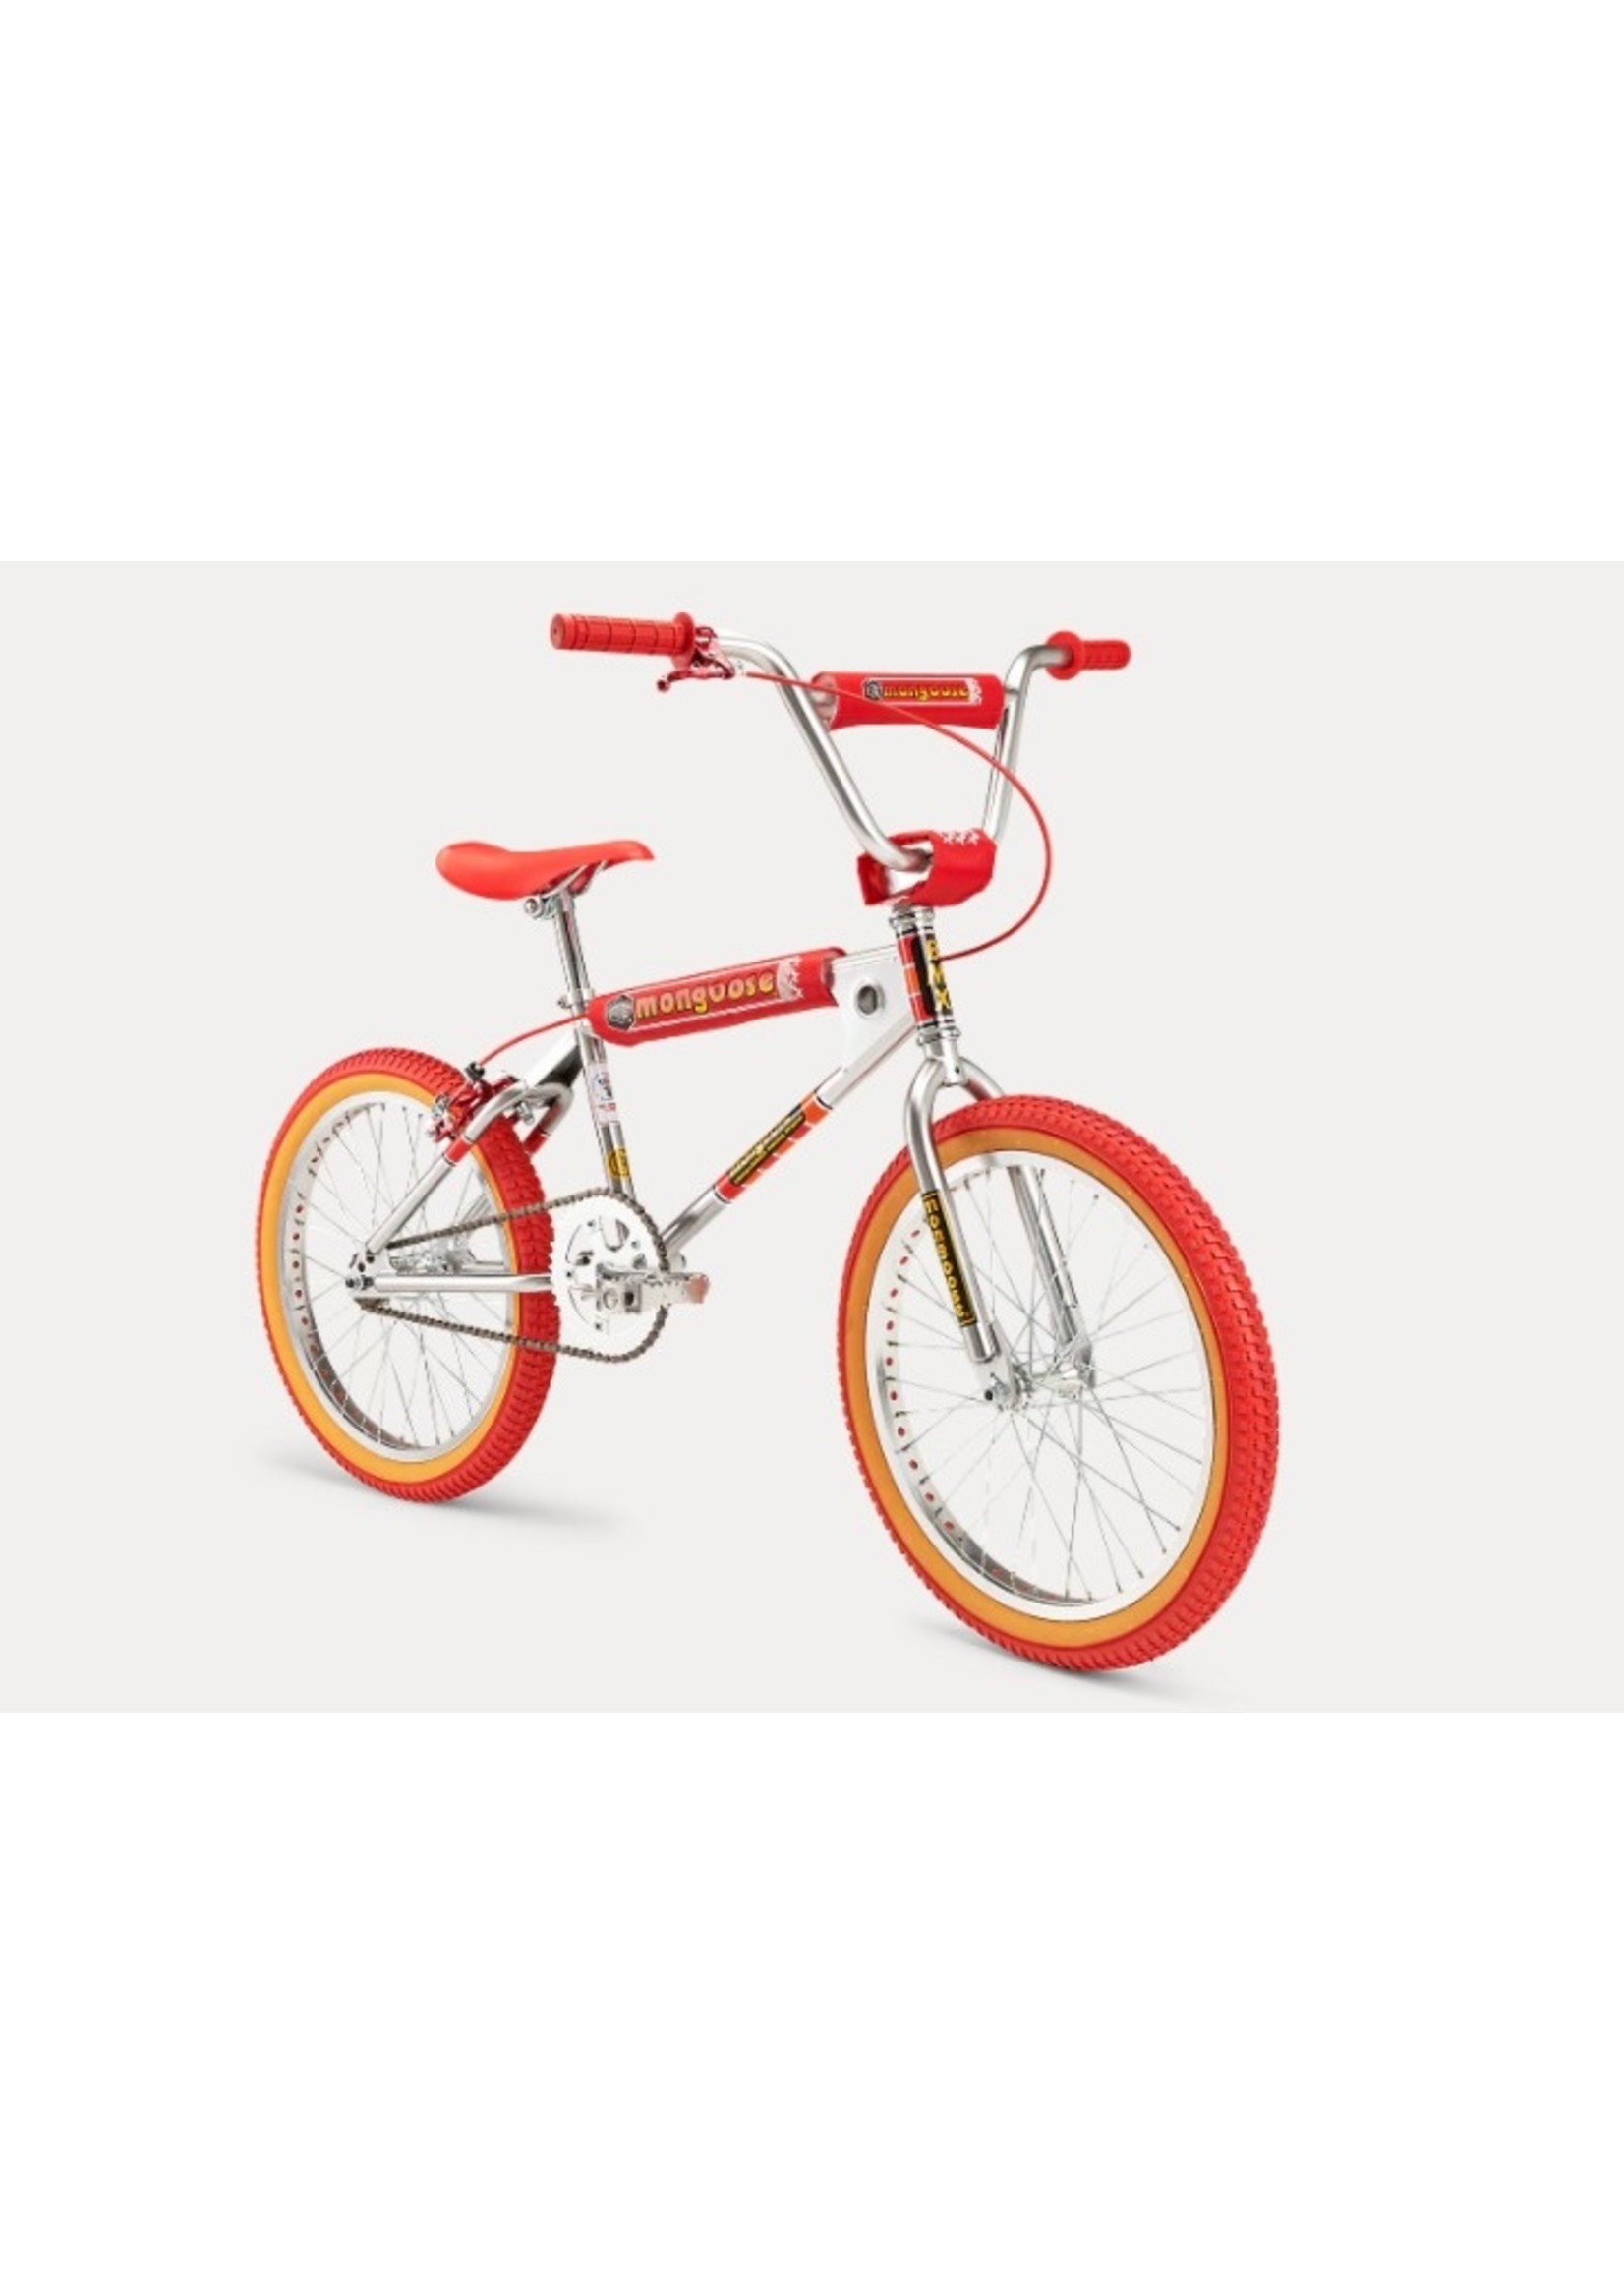 MONGOOSE MONGOOSE CALIFORNIA SPECIAL RED